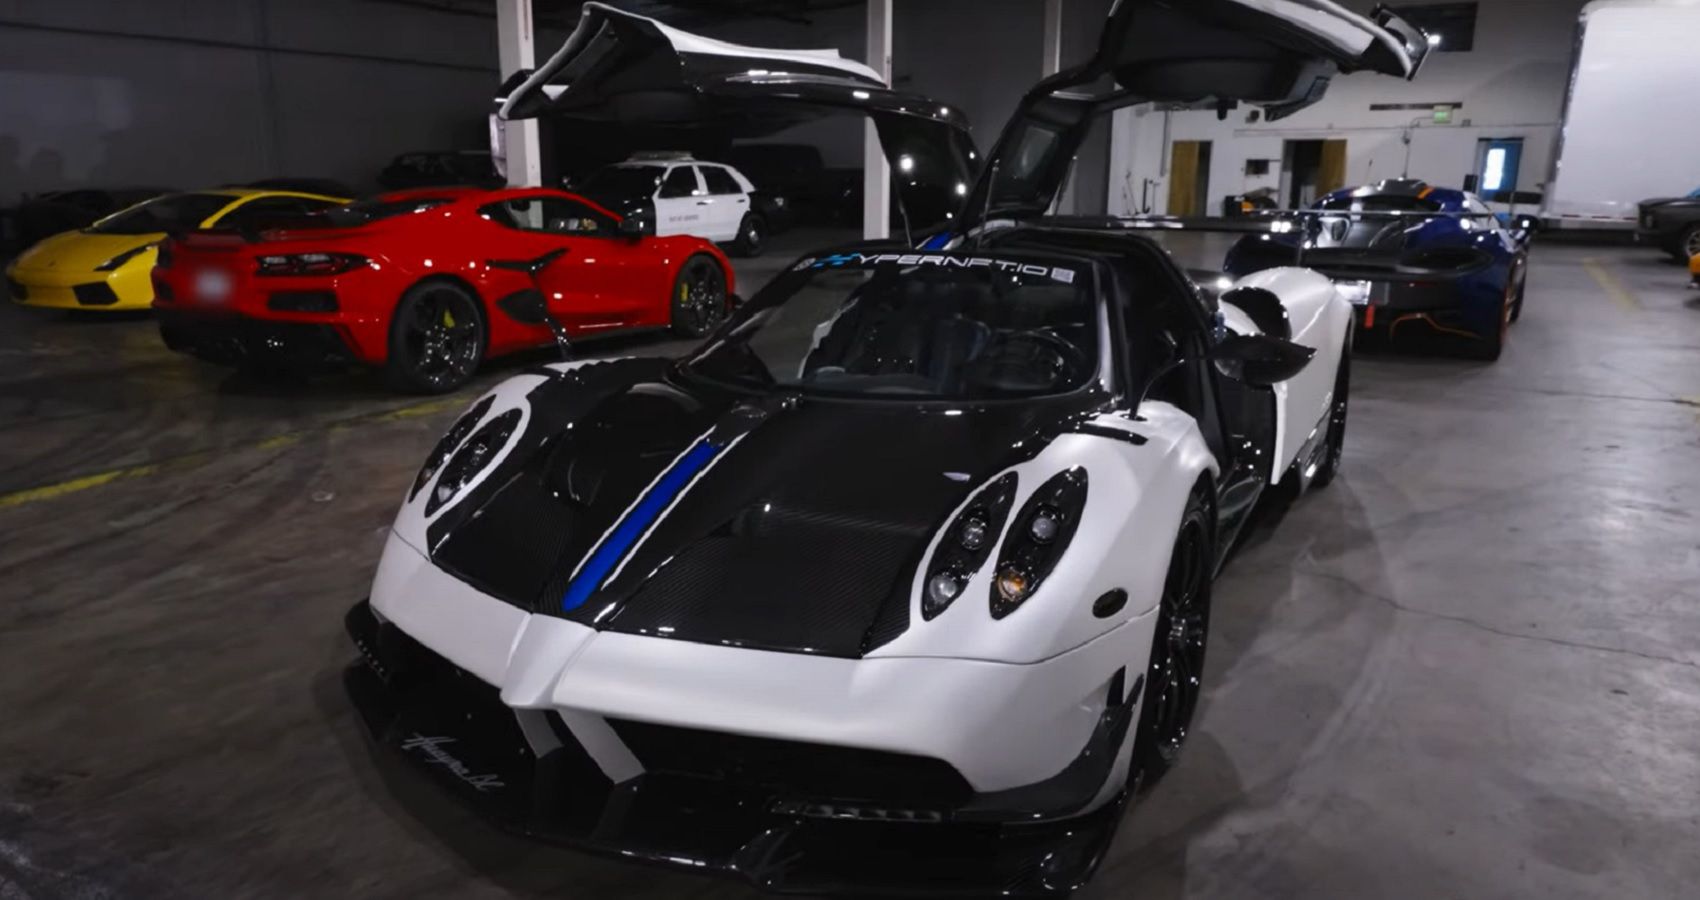 C8 Chevrolet Corvette Z06 and Pagani Huayra BC in a garage